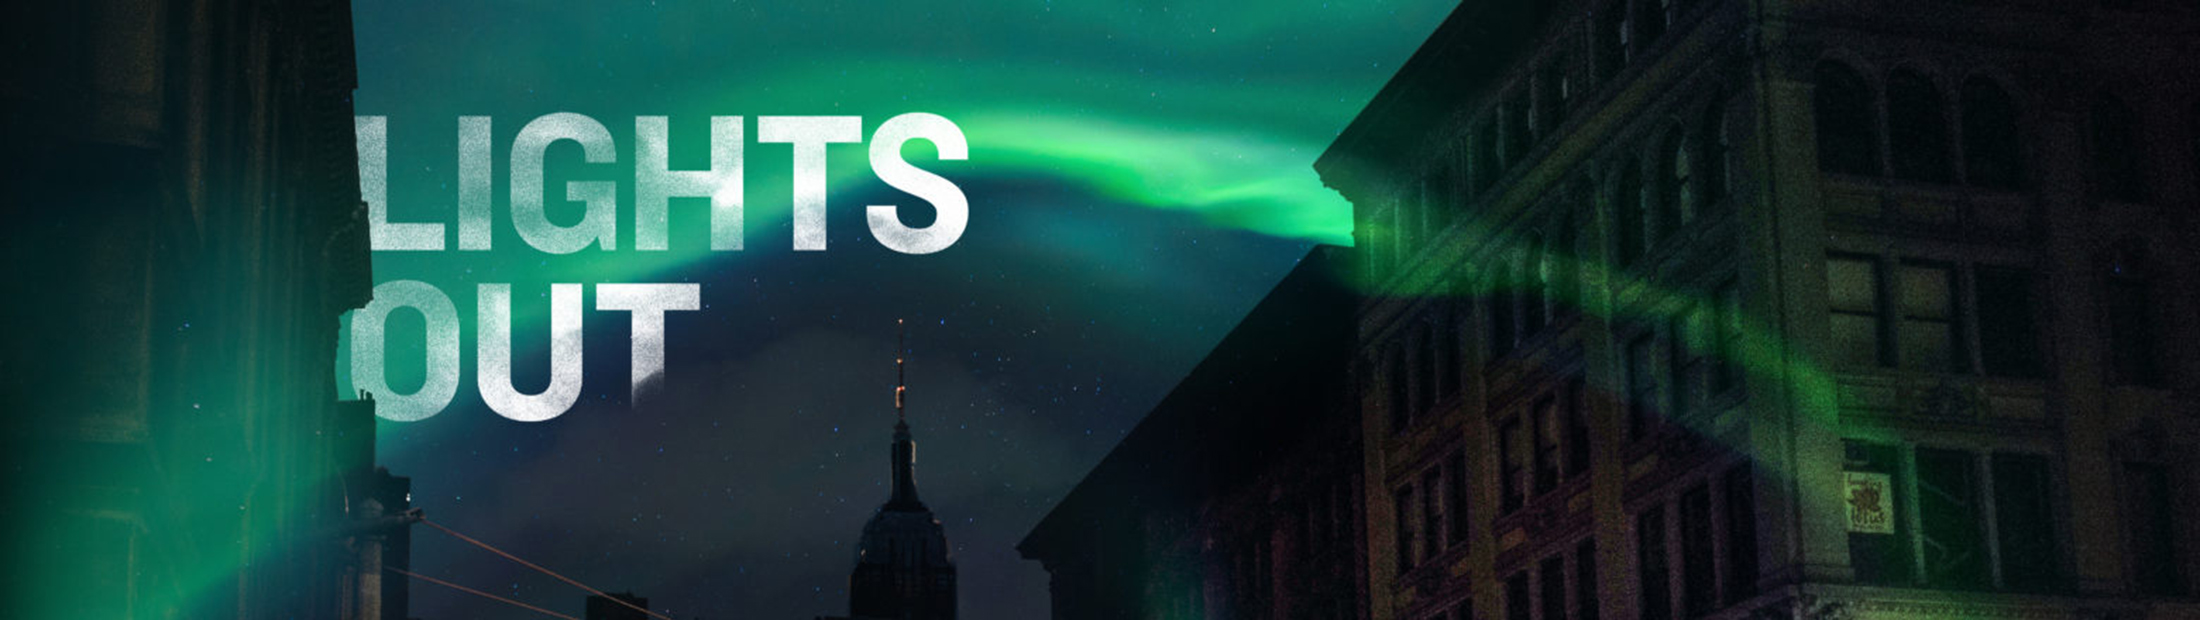 An aurora over a city with the words "Lights Out" over the image.